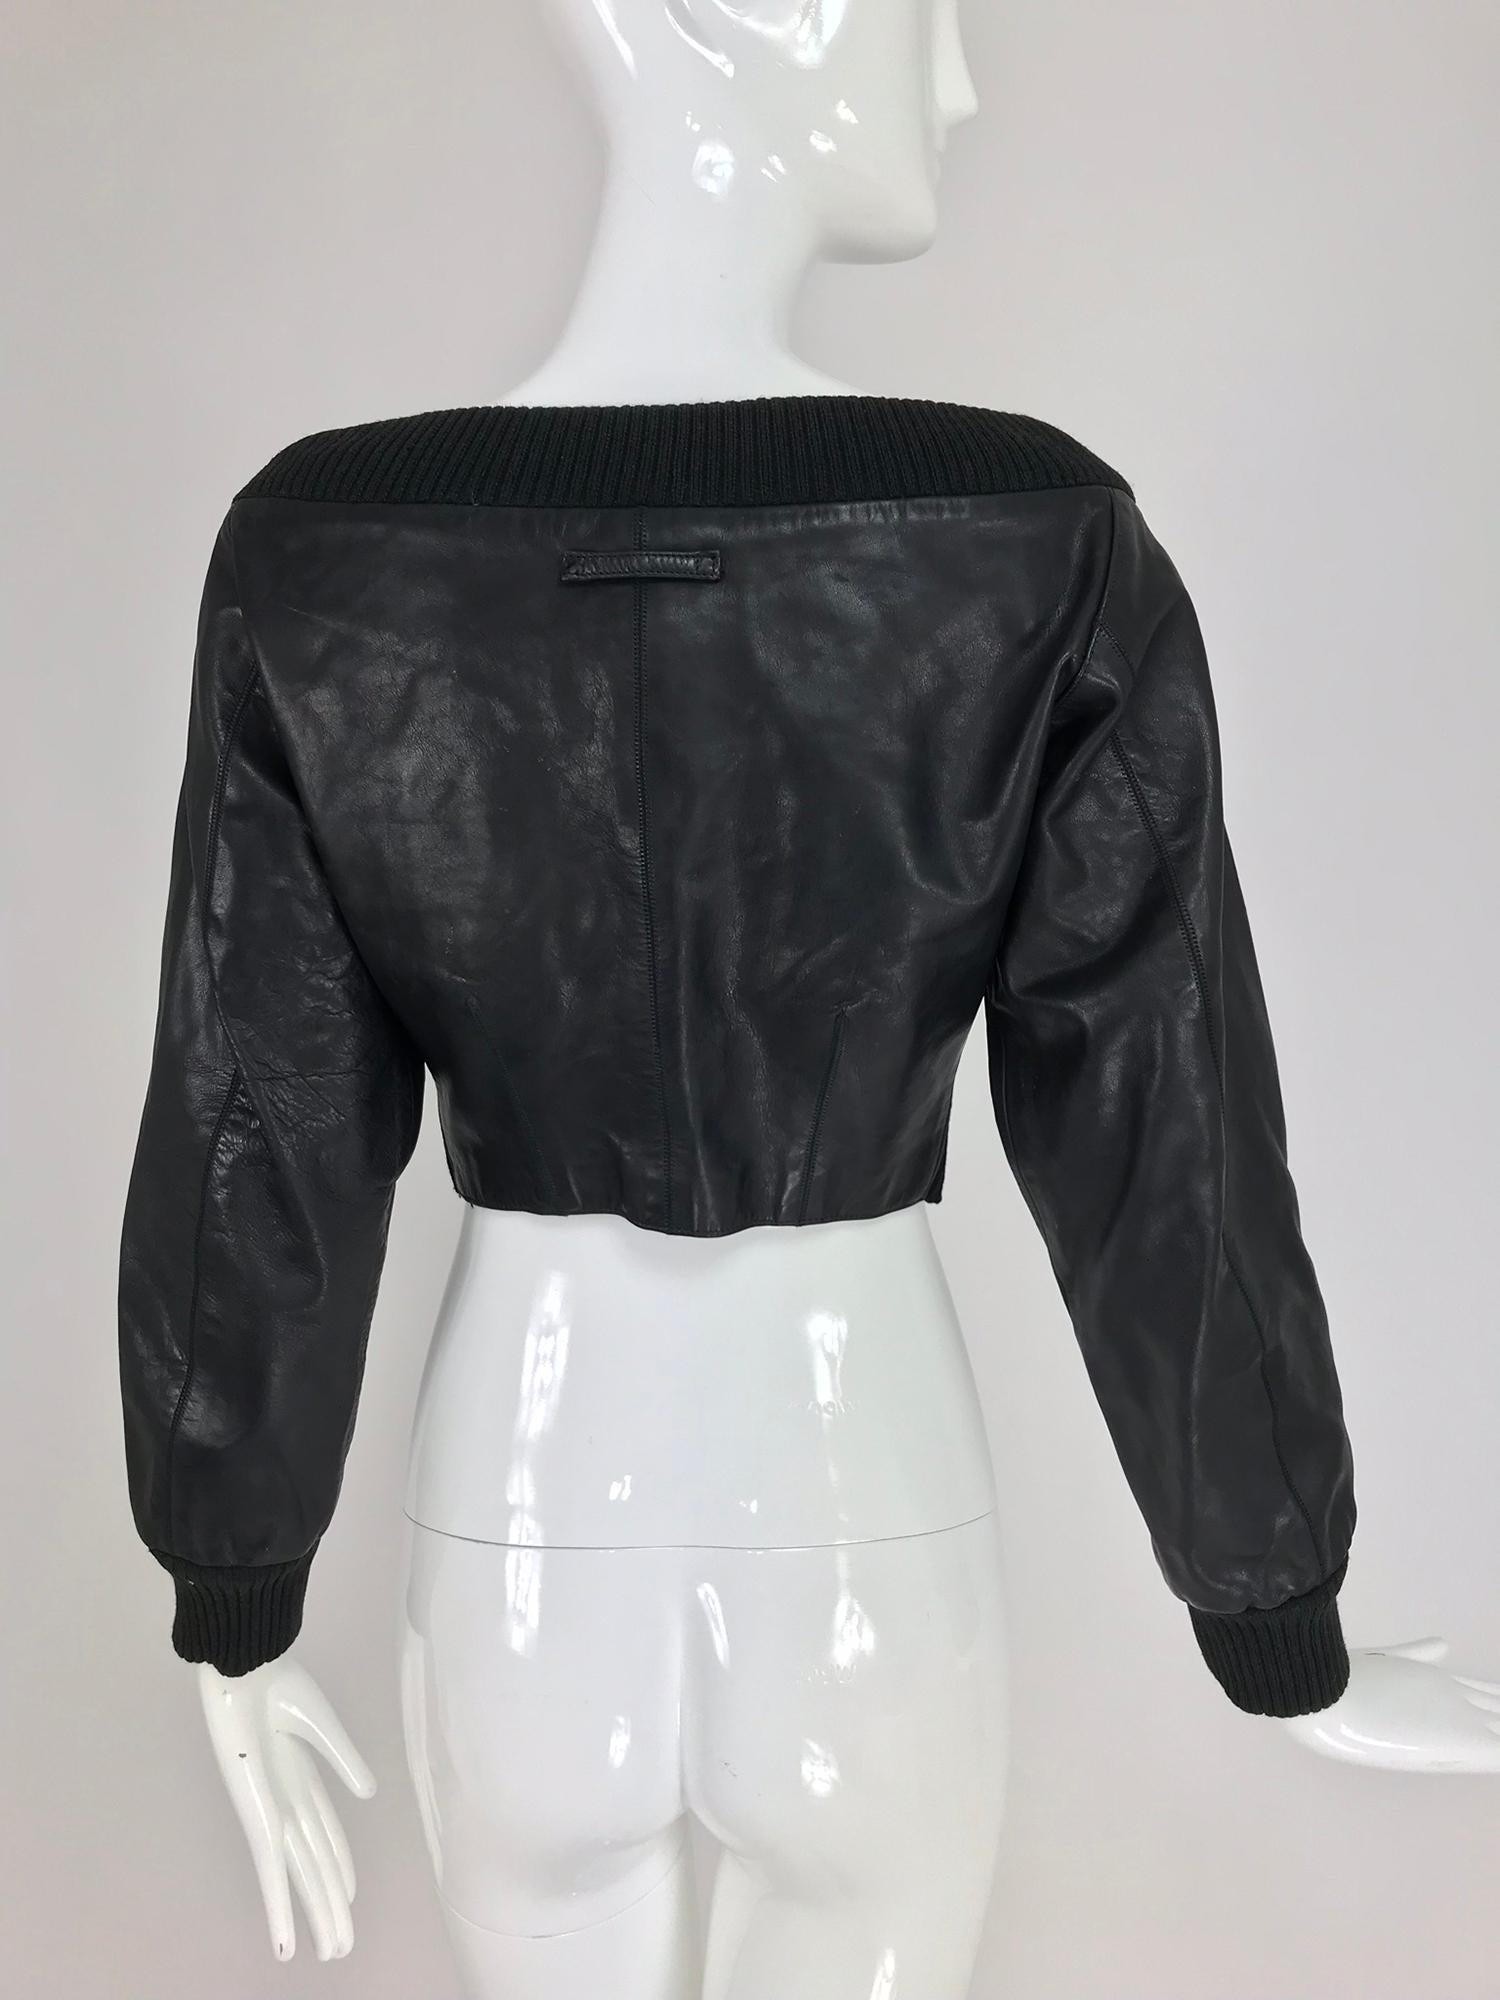 Jean Paul Gaultier black leather and Knit Off the Shoulder Jacket 1990s 1